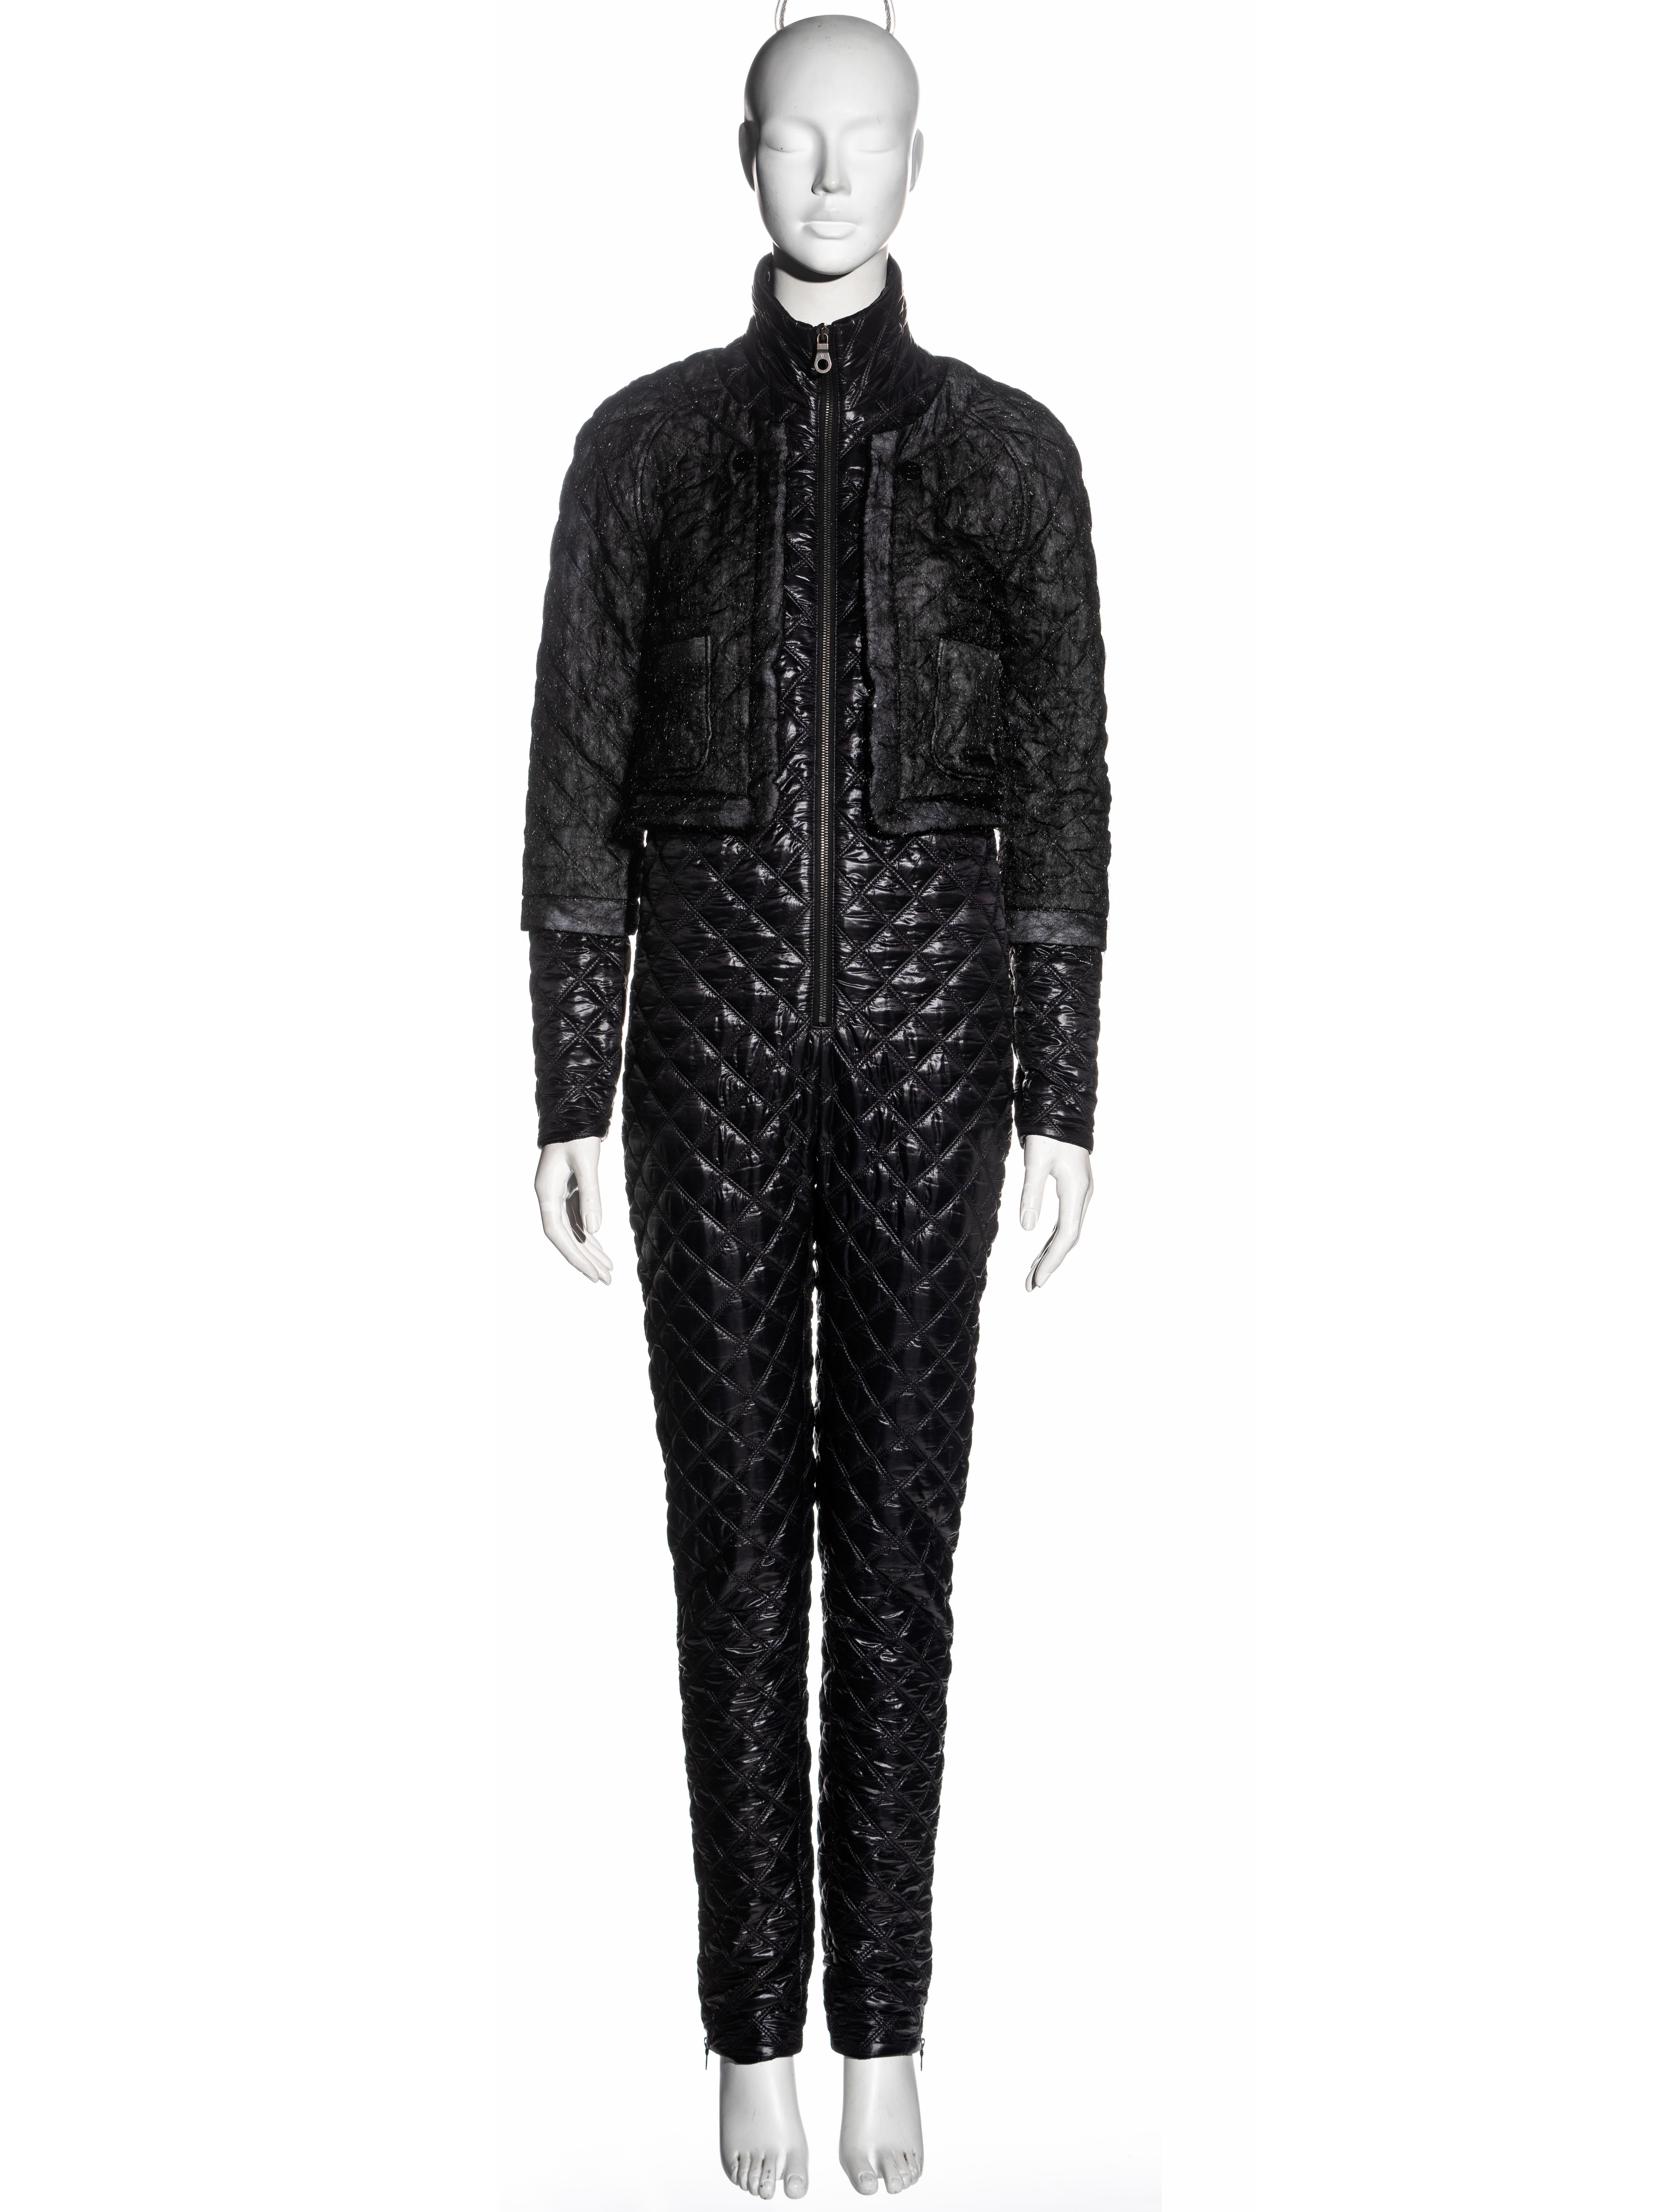 ▪ Chanel jumpsuit 
▪ Designed by Karl Lagerfeld 
▪ Black quilted nylon 
▪ Attached cropped jacket 
▪ Zip fastenings 
▪ FR 36 - UK 8 - US 4
▪ Fall-Winter 2011
▪ 98% Polyamide, 2% Polyurethane 
▪ Made in Italy